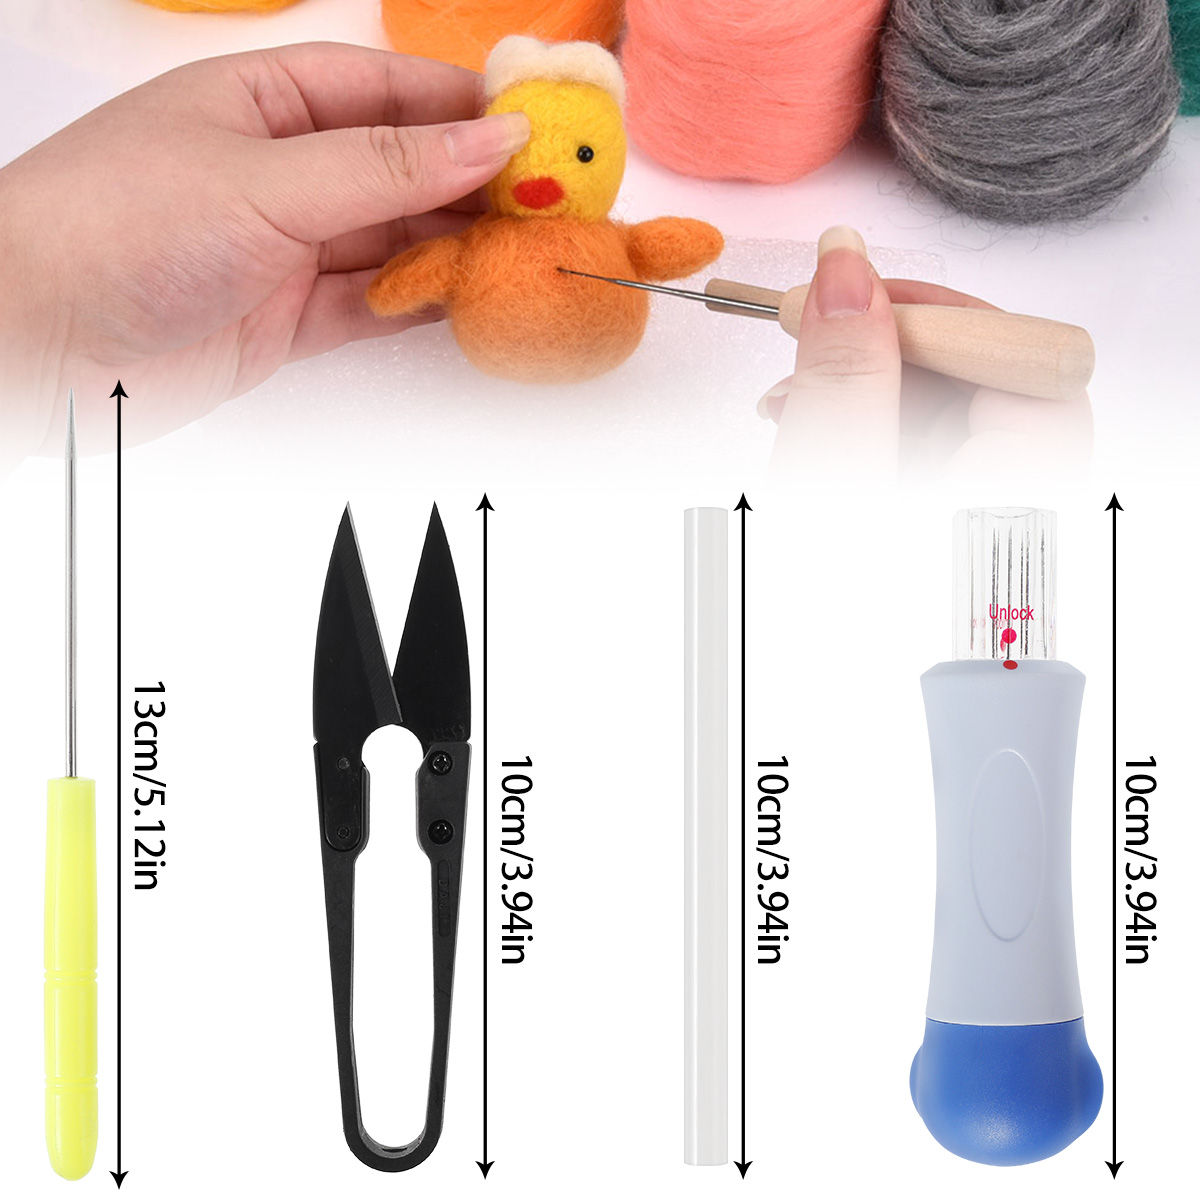 Austok Needle Felting Kit, 24 Colors Wool Roving, Needle Felting Starter Kit,Wool Felt Tools with Felting Tool Instruction Included for Felted Animal